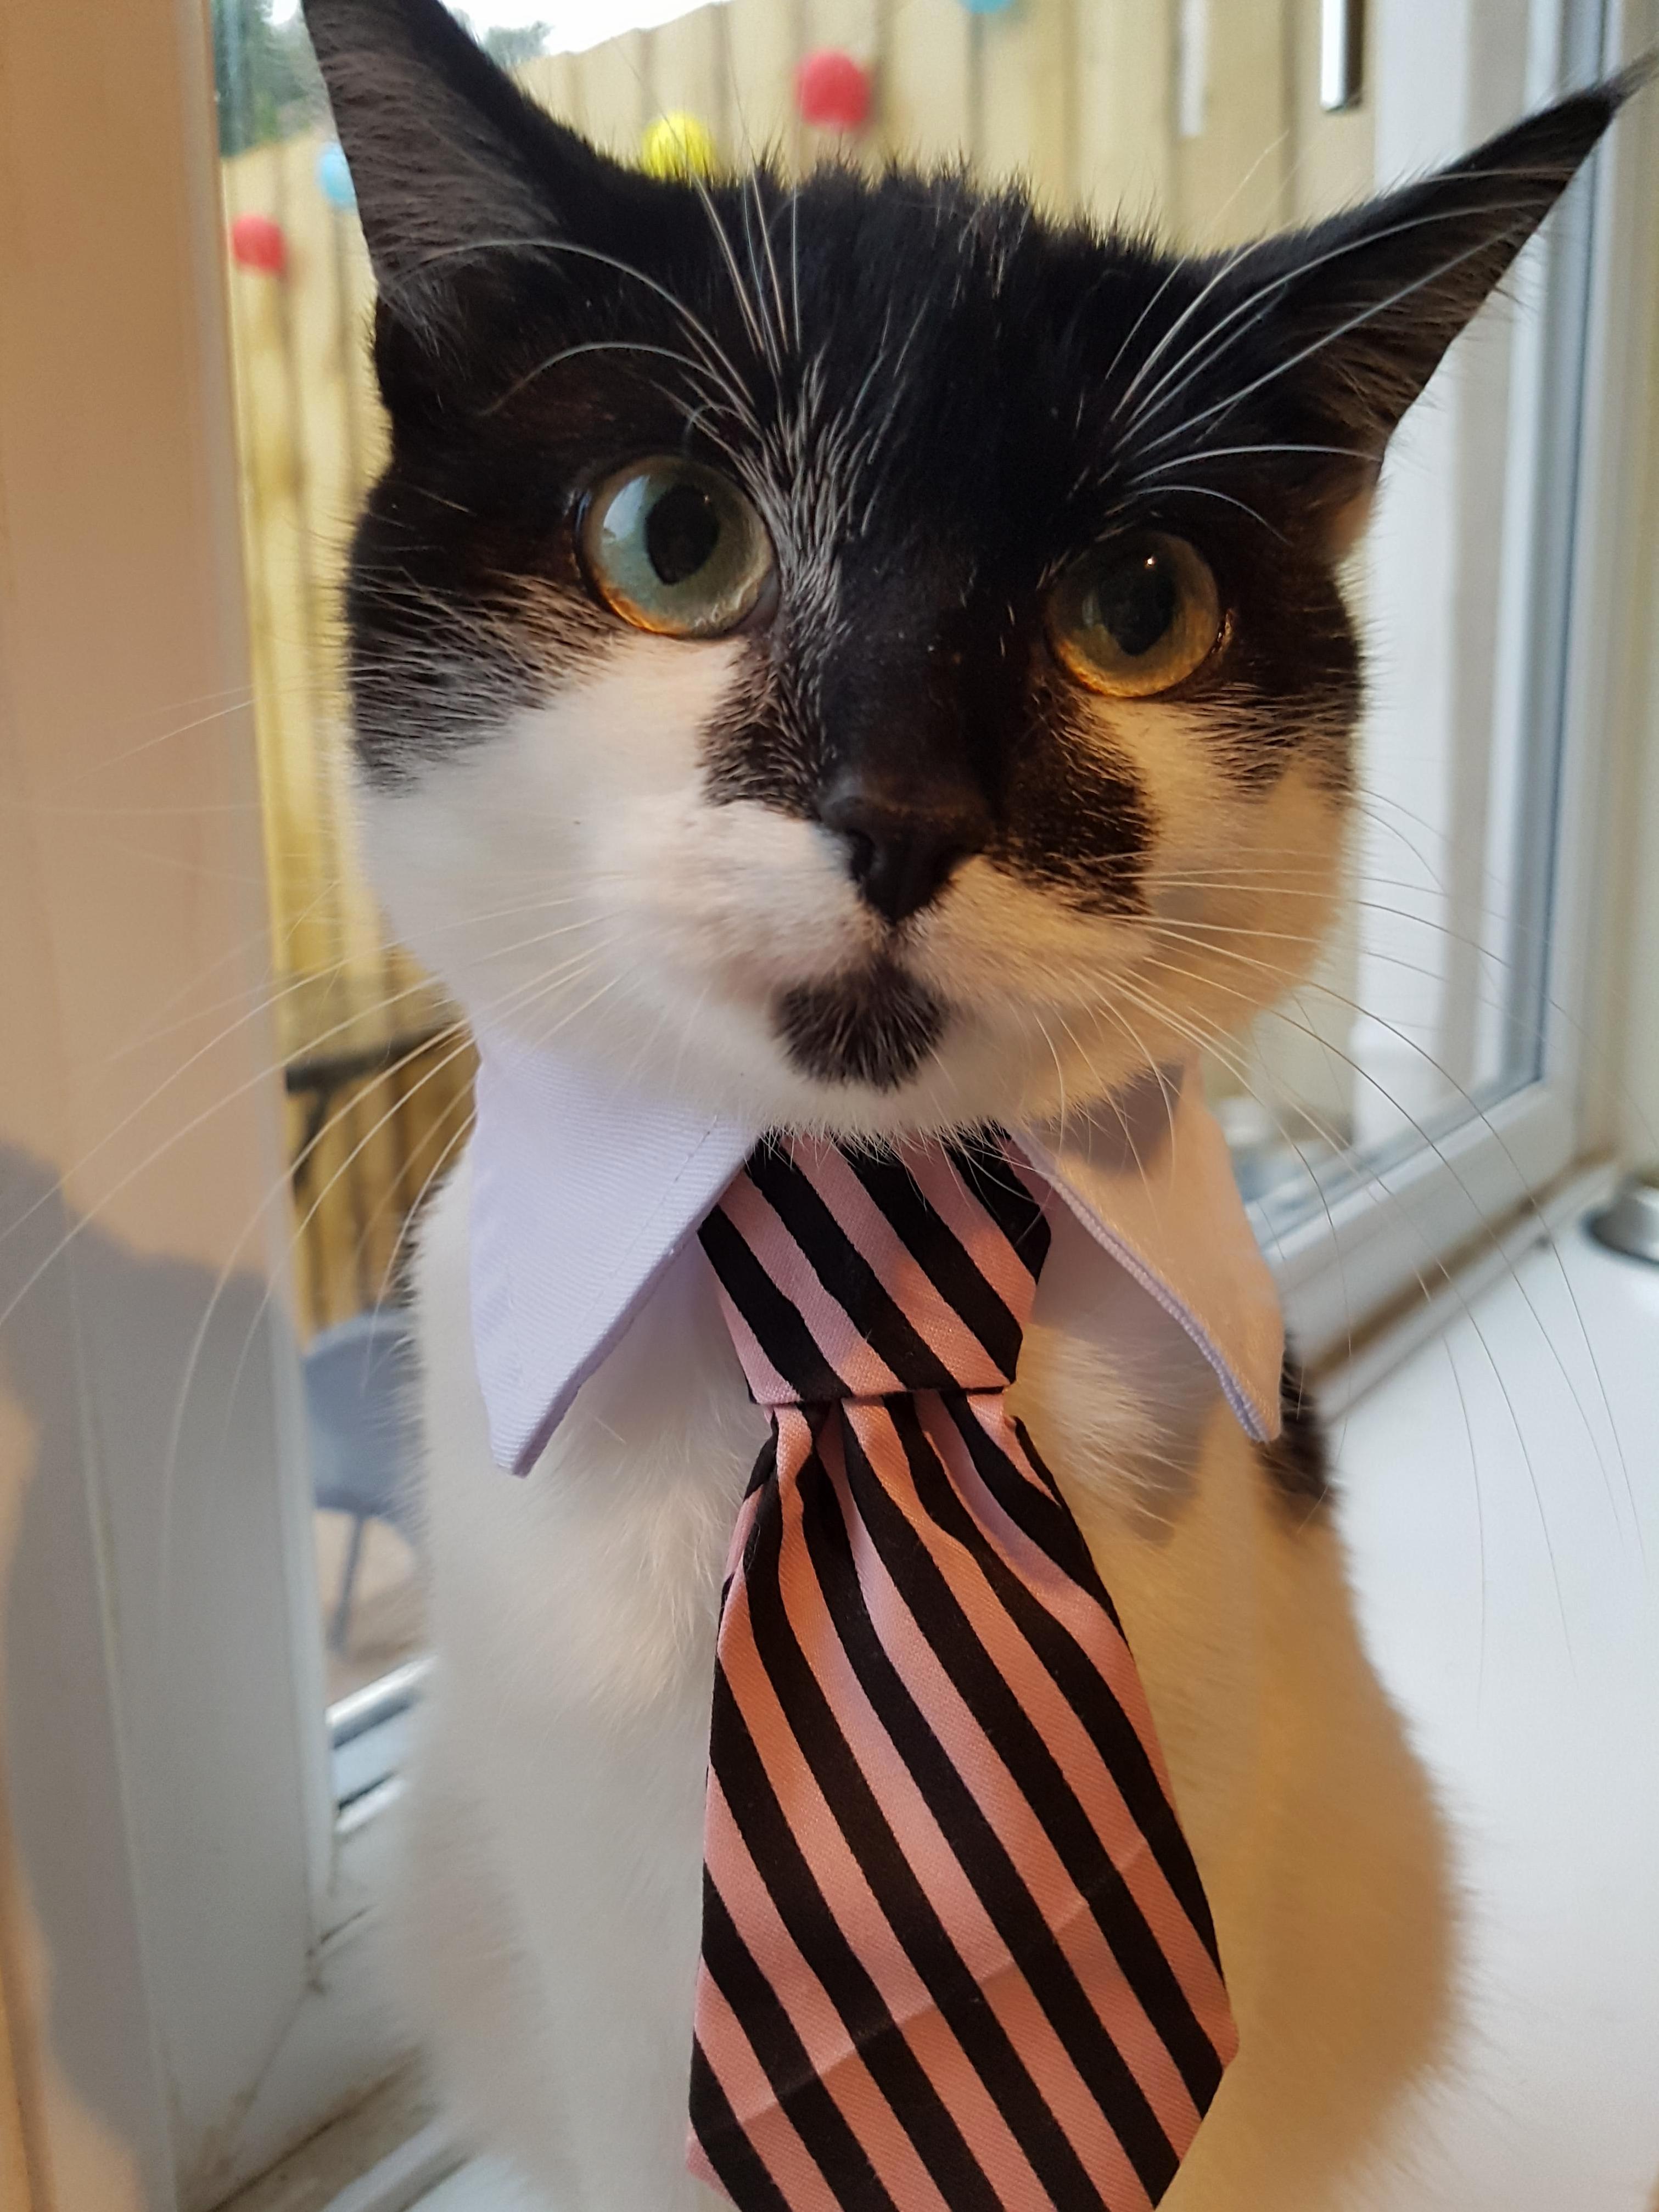 So i bought my cat a tie and now she looks like a professional.